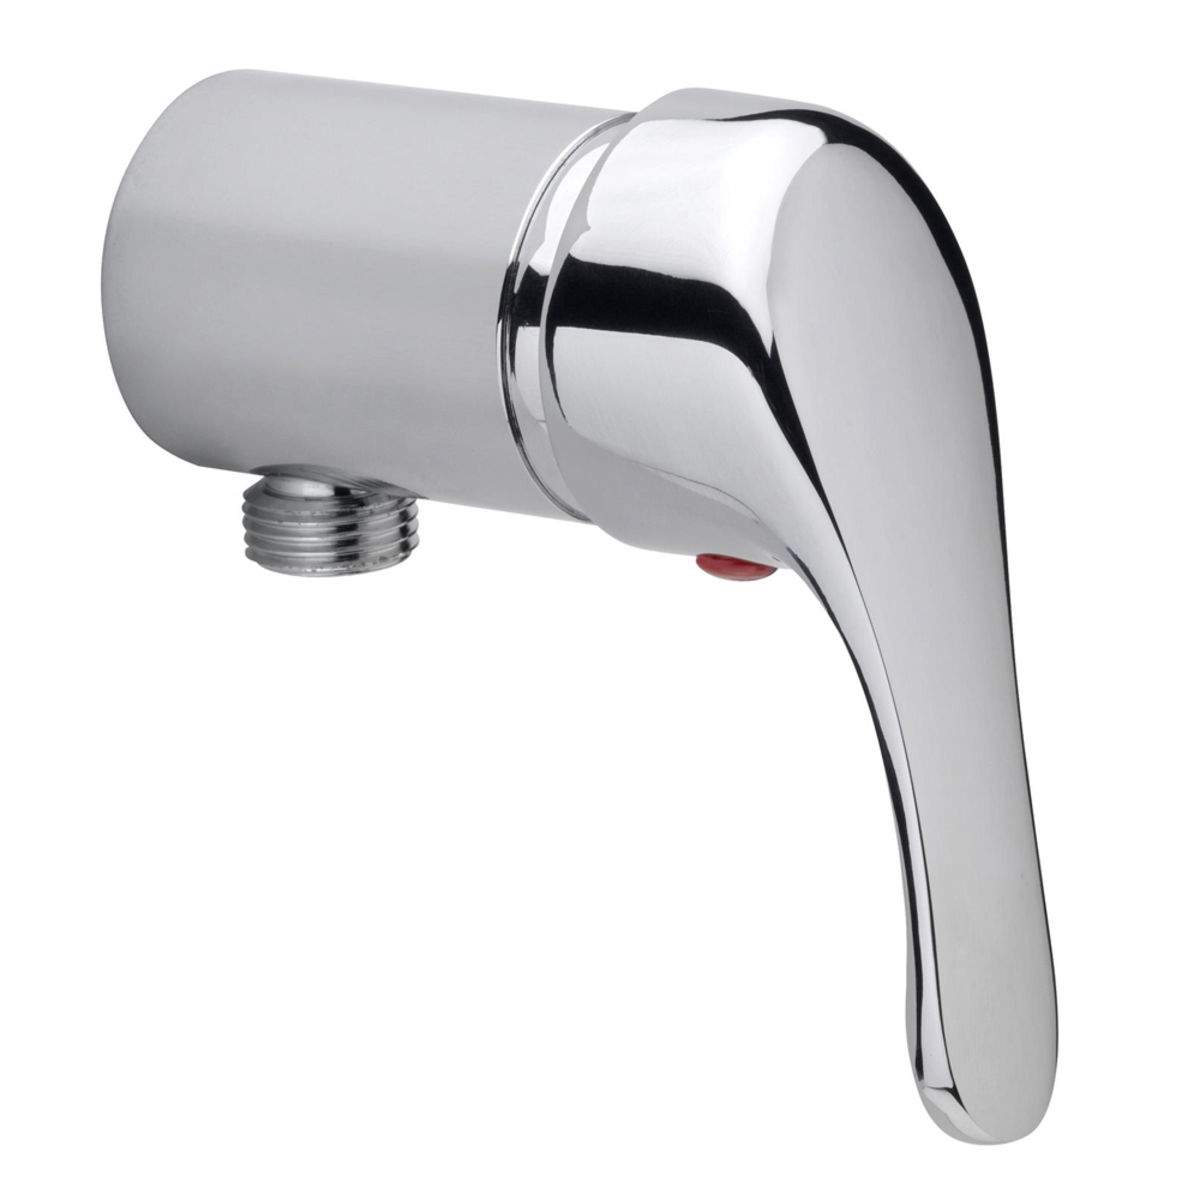 Semi-recessed chrome faucet for shower stall